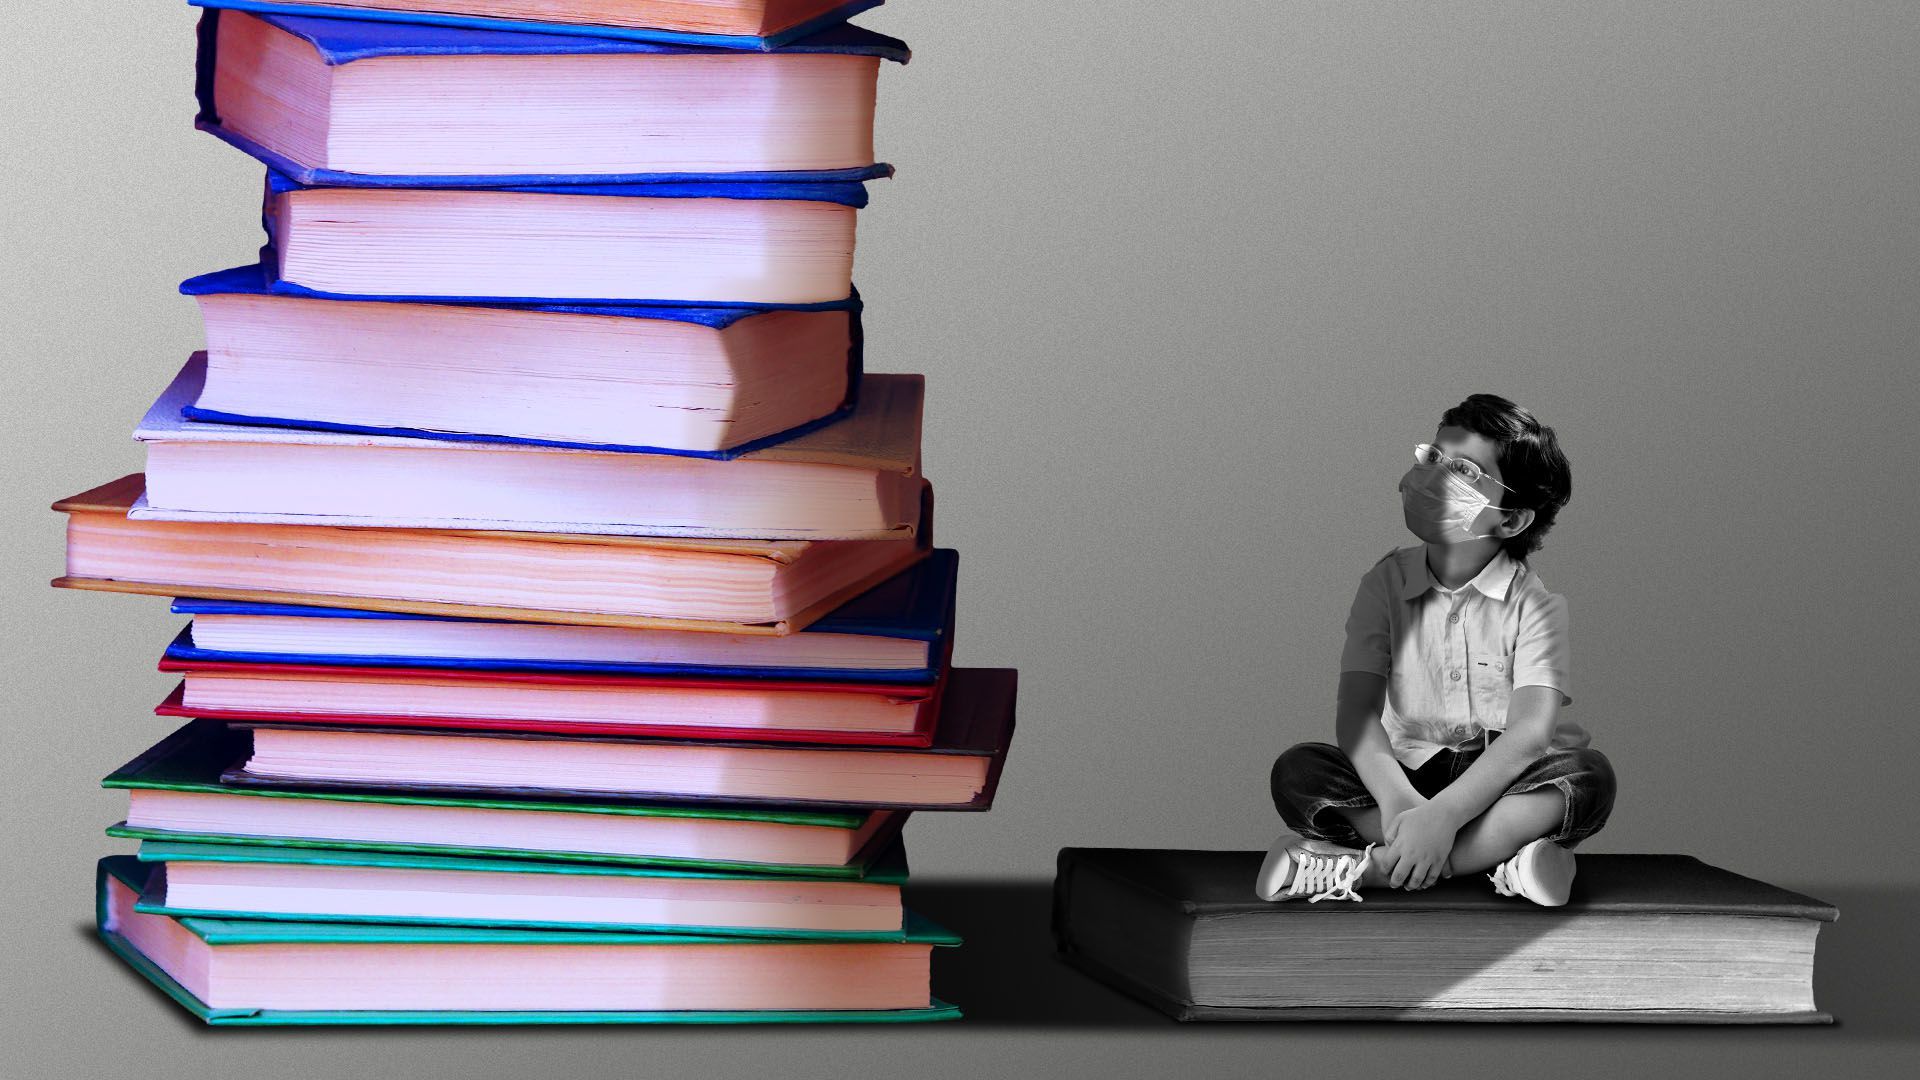 Illustration of a child sitting on a single book looking up at a stack of books above him